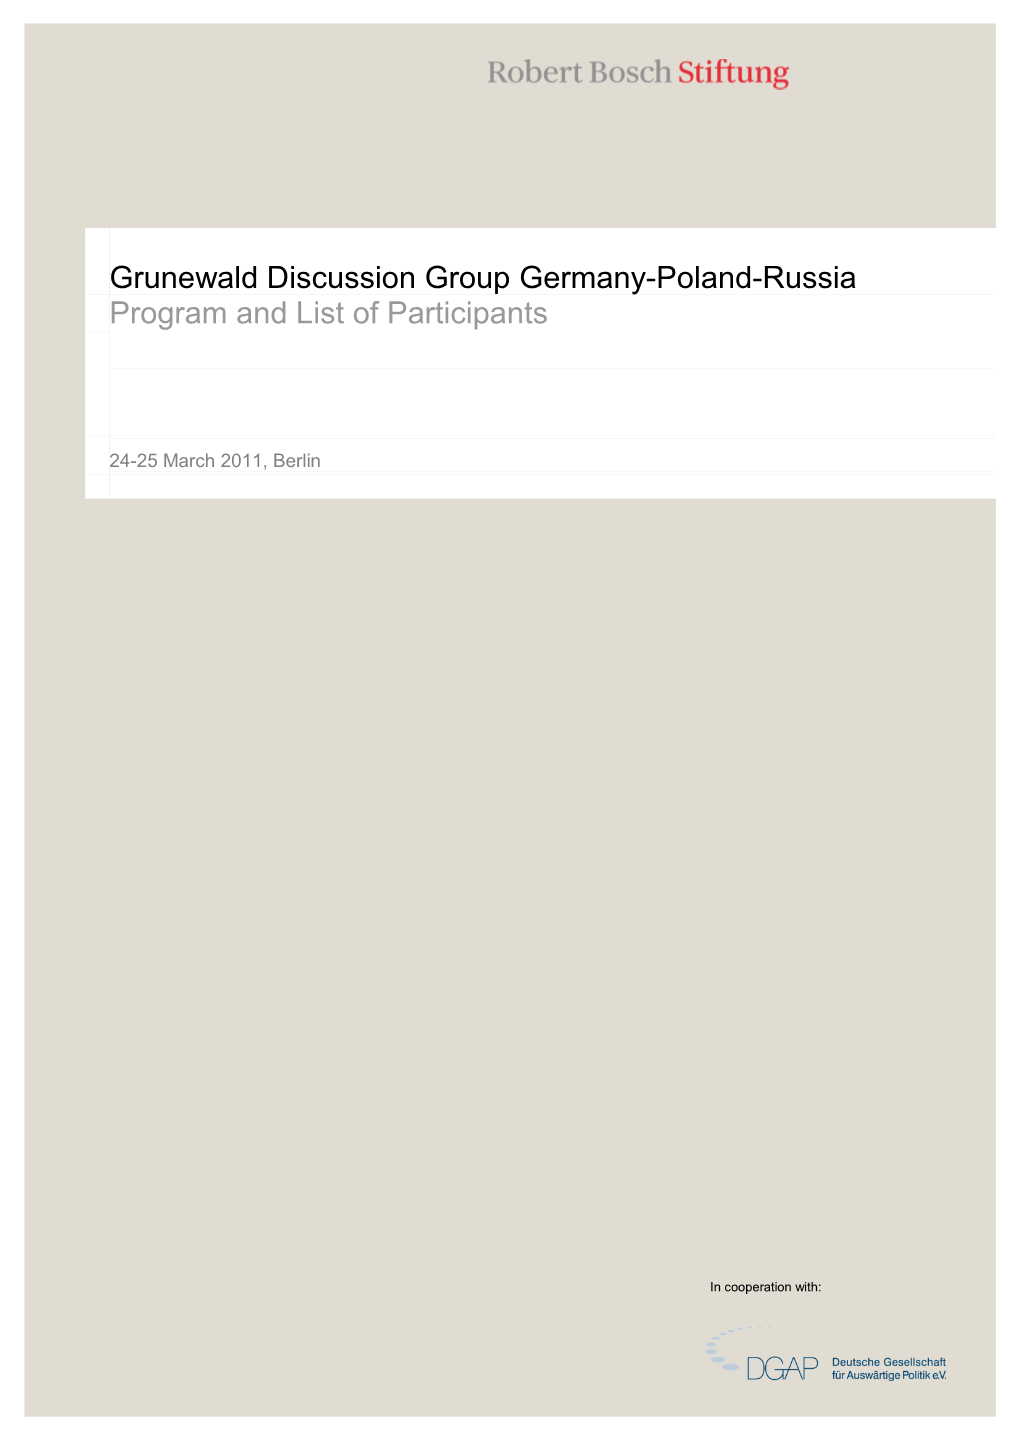 Grunewald Discussion Group Germany-Poland-Russia Program and List of Participants